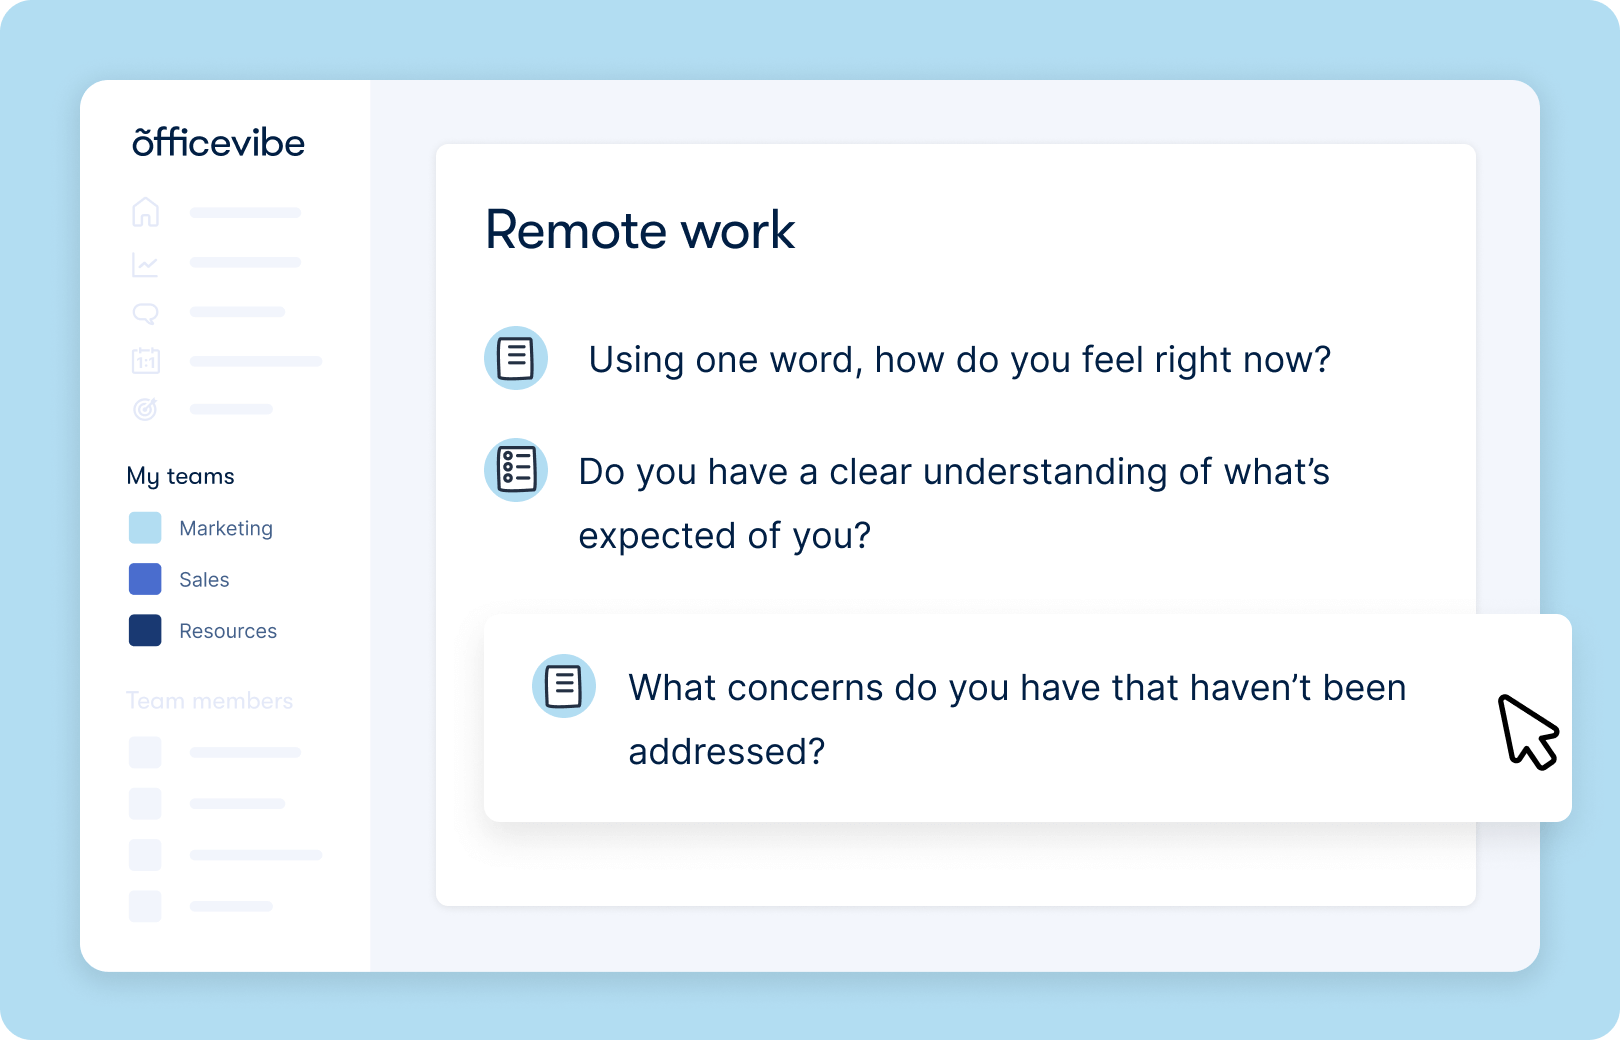 Officevibe’s remote work employee survey template